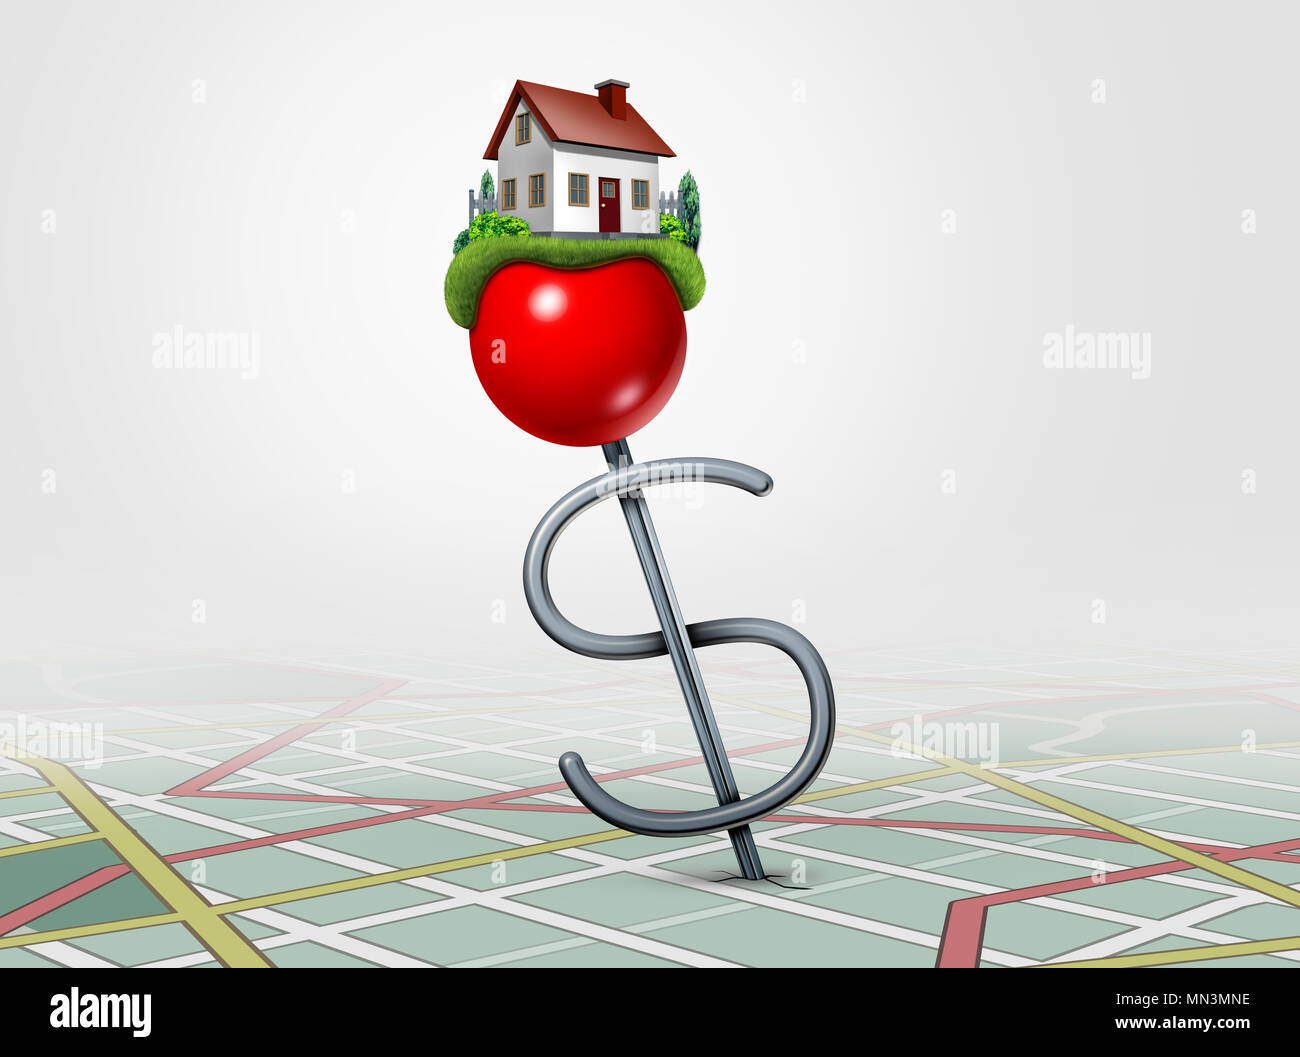 Real estate investing and finding a family home property concept as a 3D illustration. Stock Photo